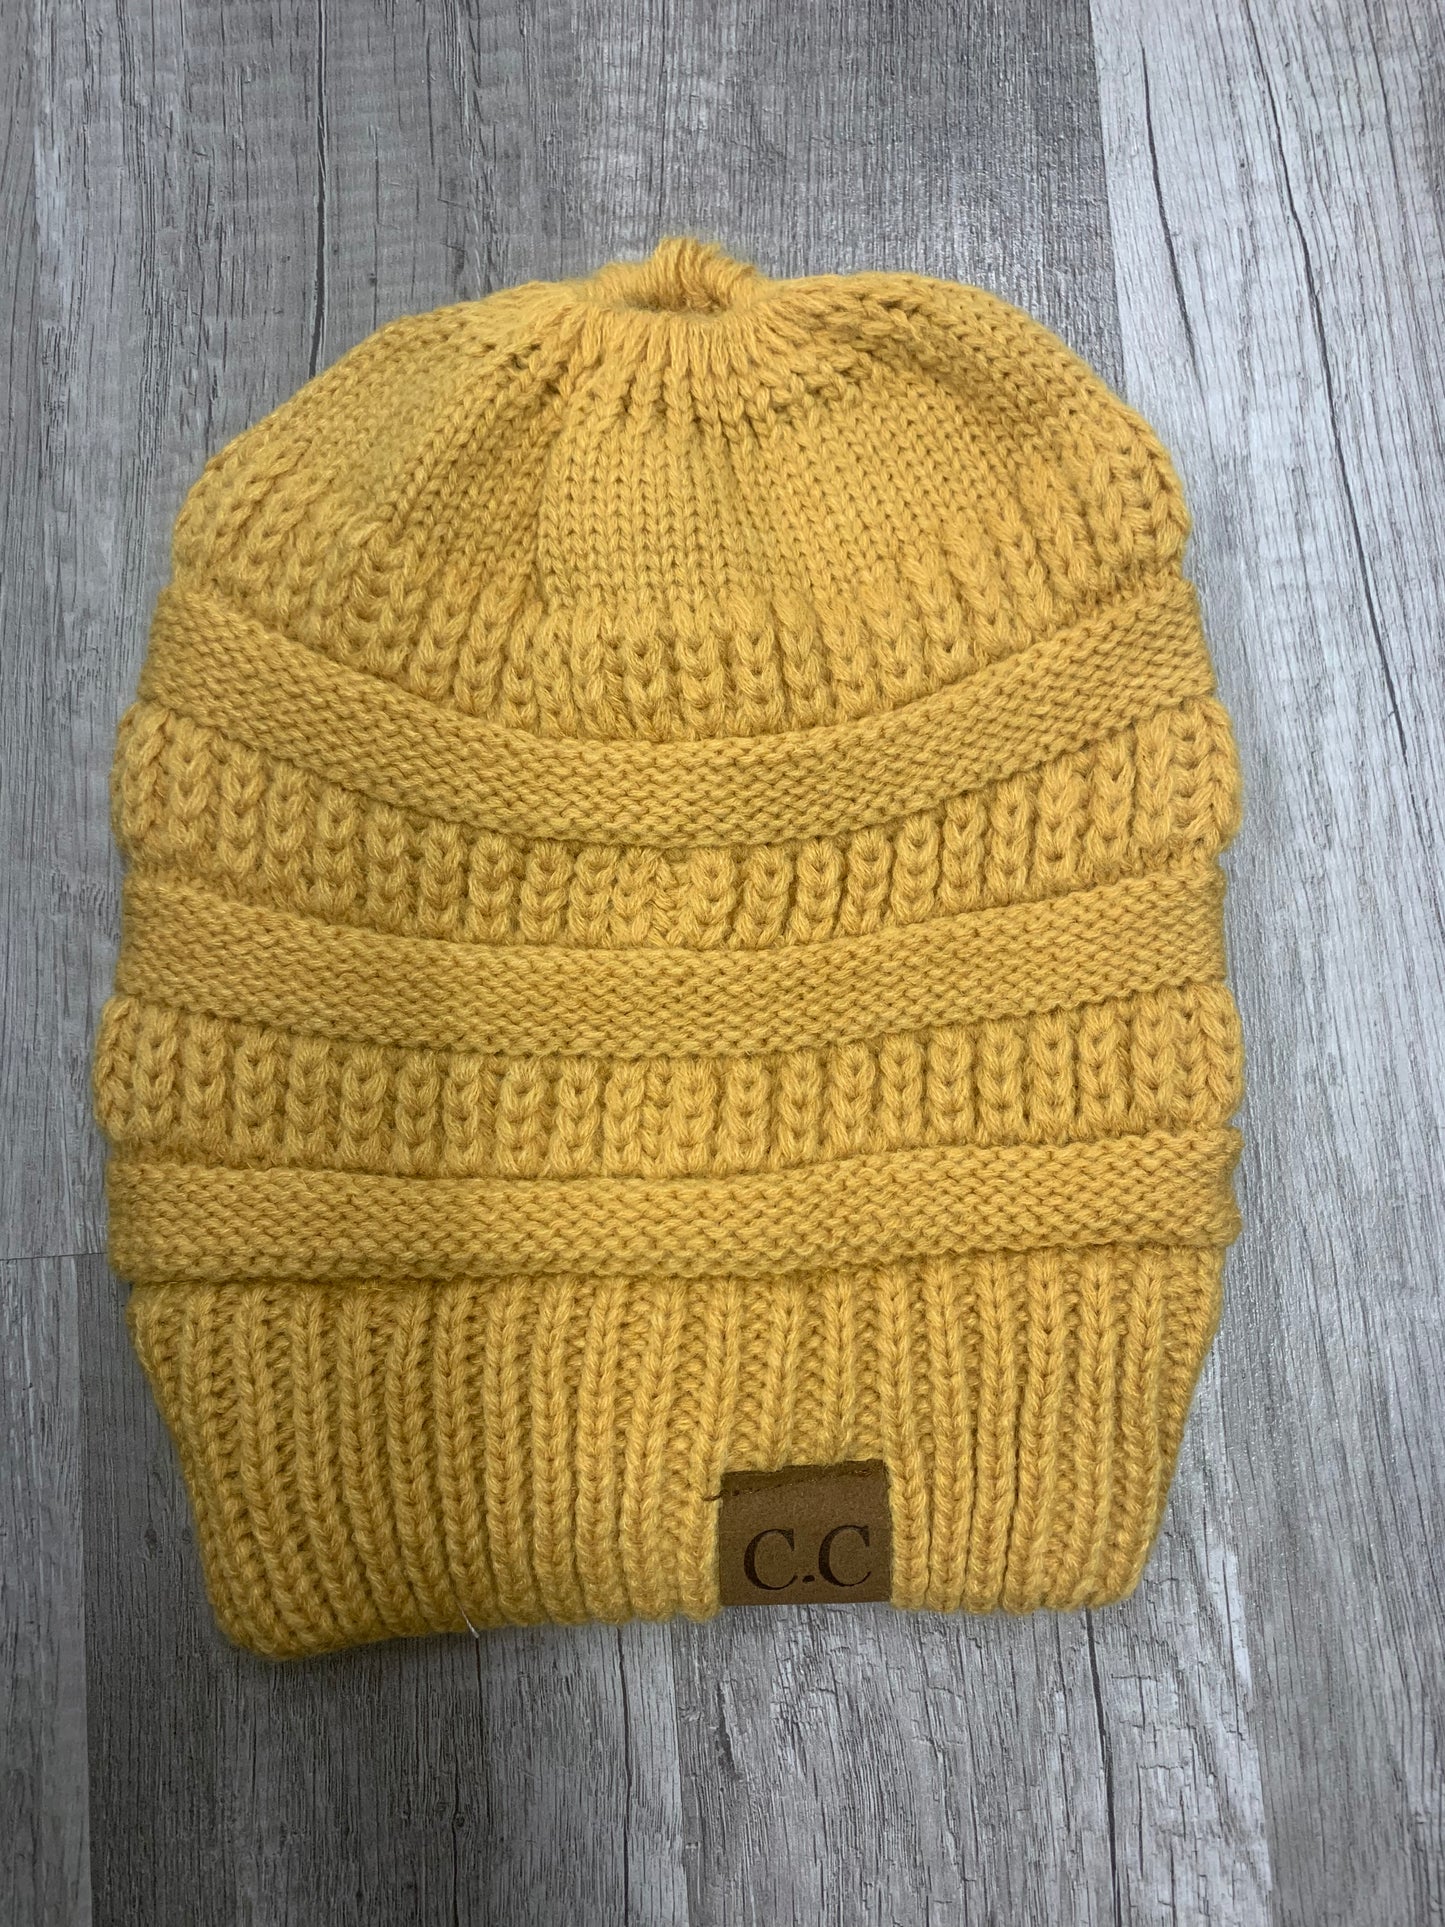 Solid CC Beanies W/ pony tail access